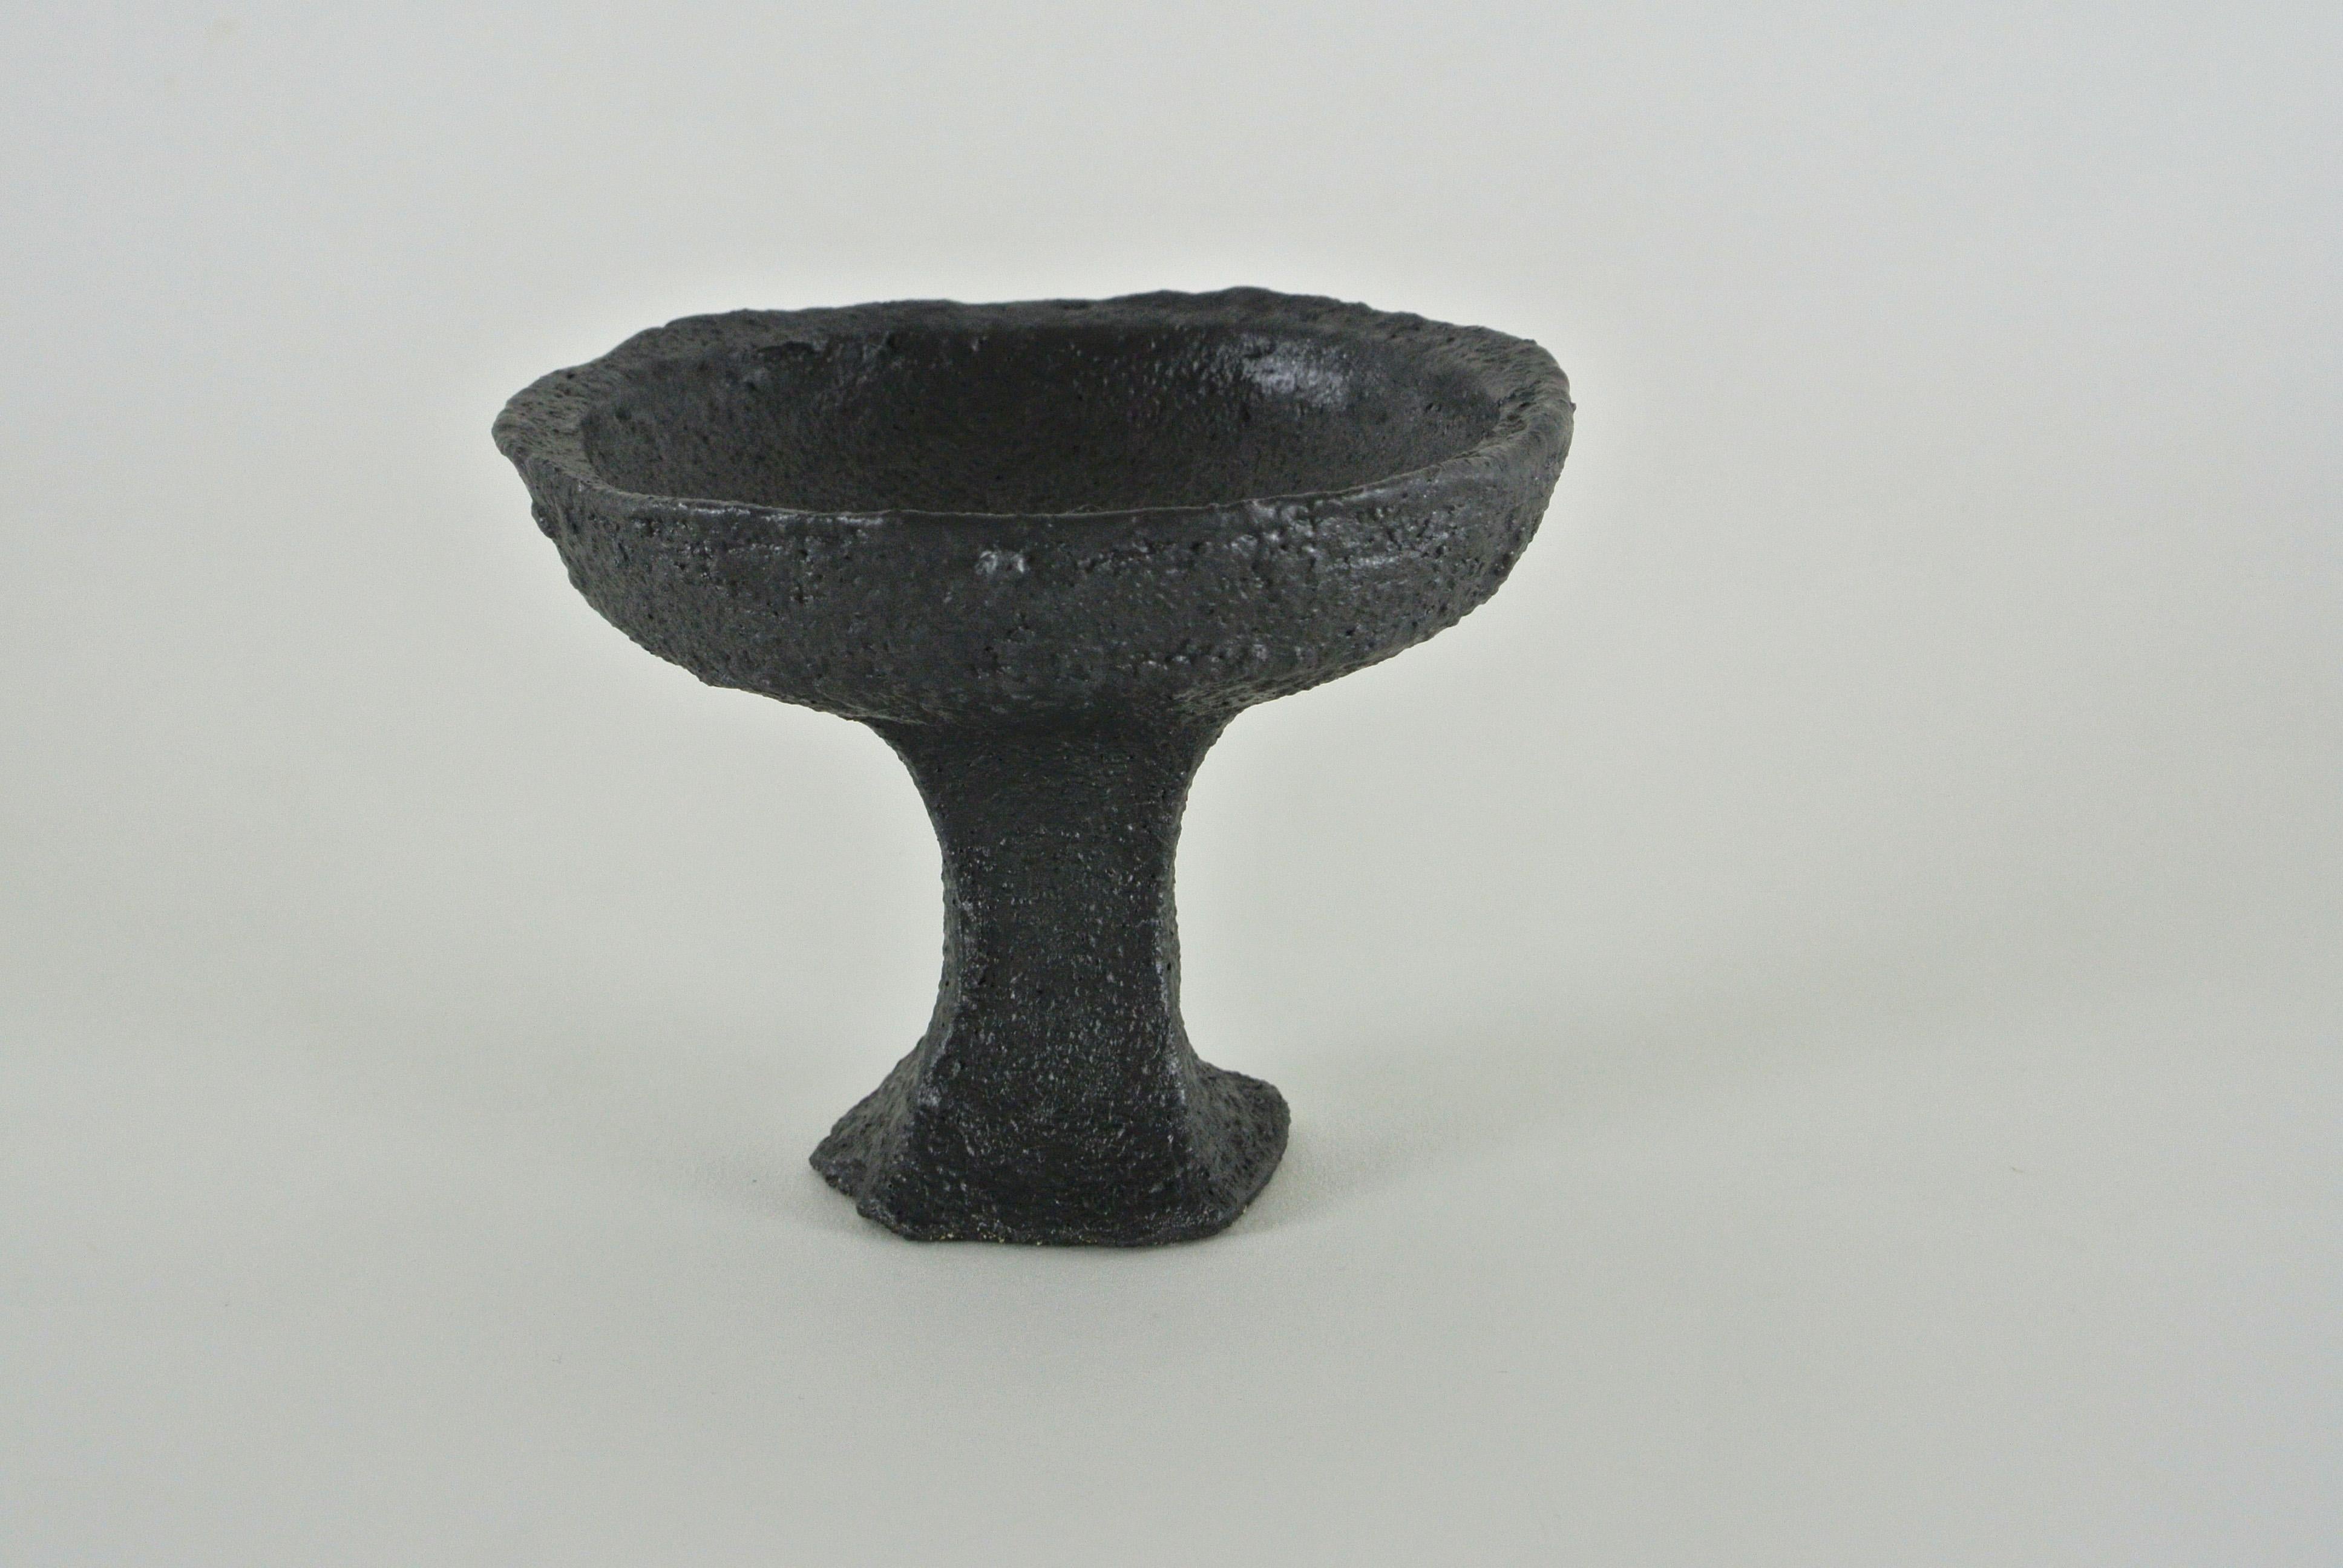 Black, rough stoneware goblet with black metallic glaze. Slightly asymmetric shape and visible fire sand structure on the surface.